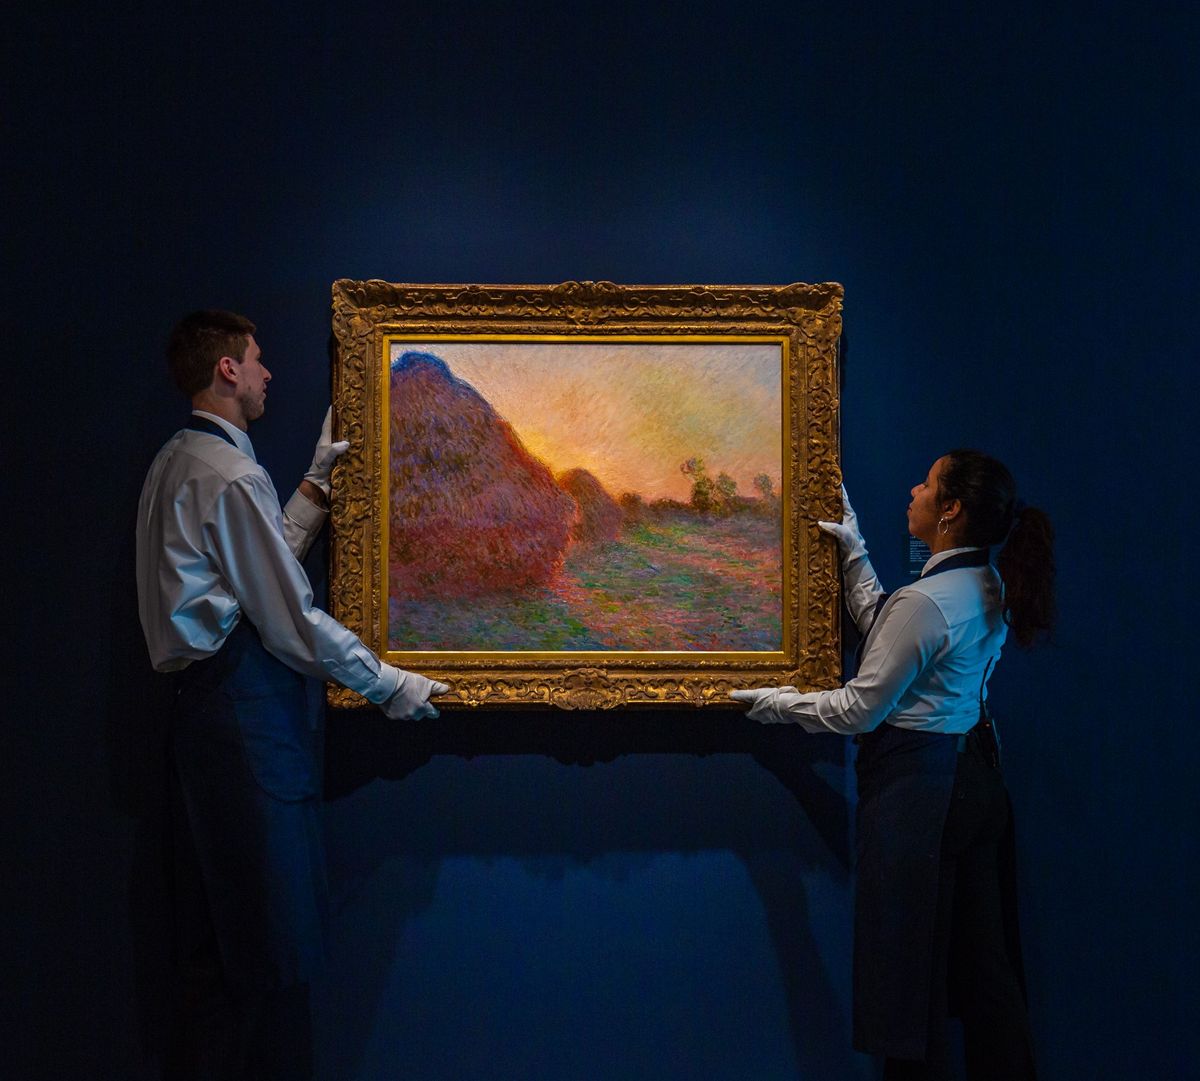 Monet's Meules (1890) set a new world record for the Impressionist artist when it sold for $110m at Sotheby's in New York Sotheby's